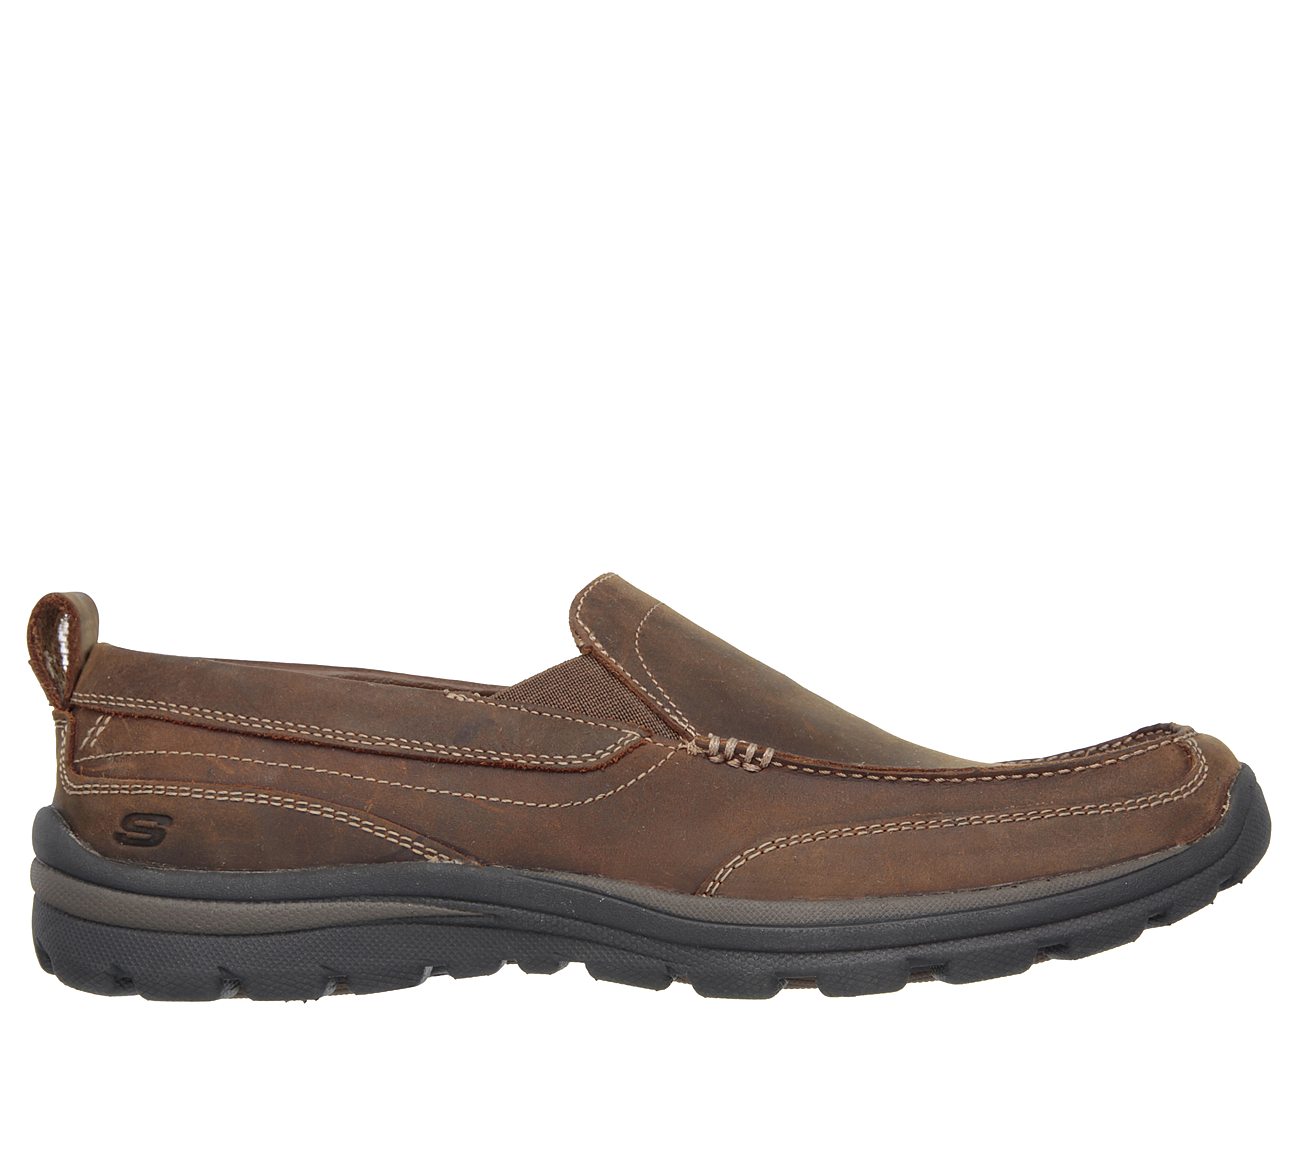 Buy SKECHERS Relaxed Fit: Superior - Gains Modern Comfort Shoes only $80.00